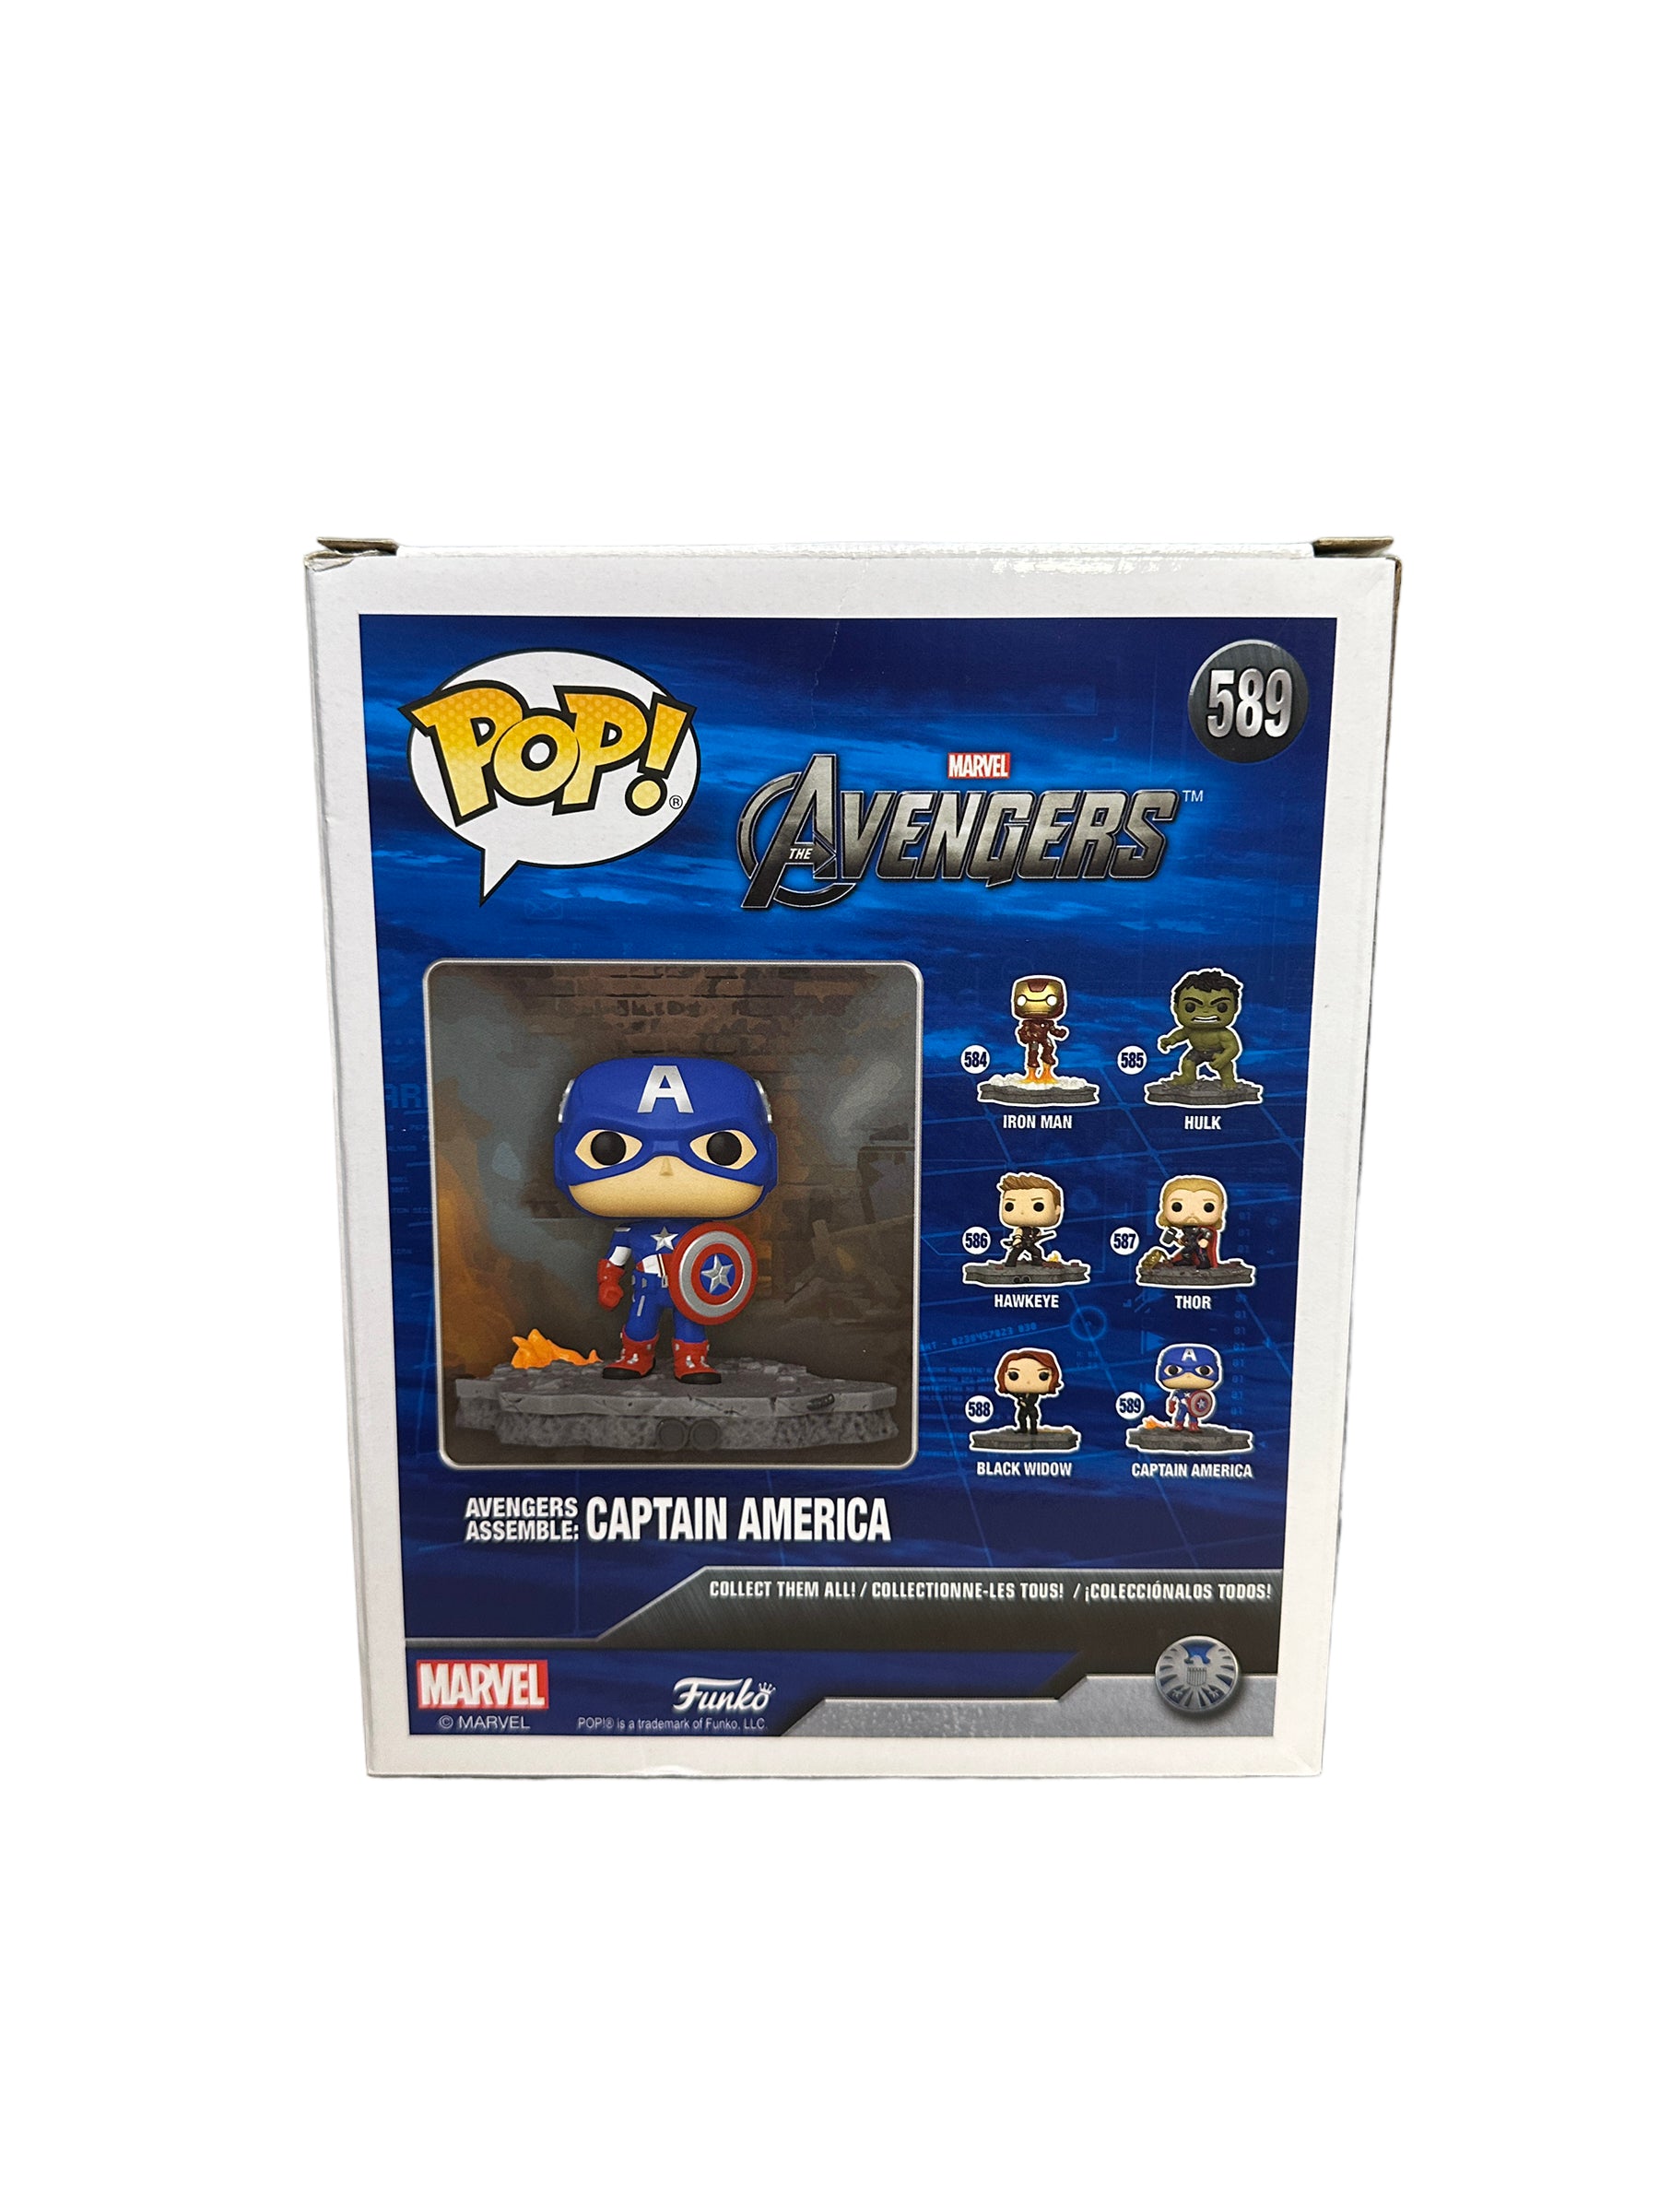 Avengers Assemble: Captain America #589 Deluxe Funko Pop! - The Avengers - Special Edition - Condition 8/10